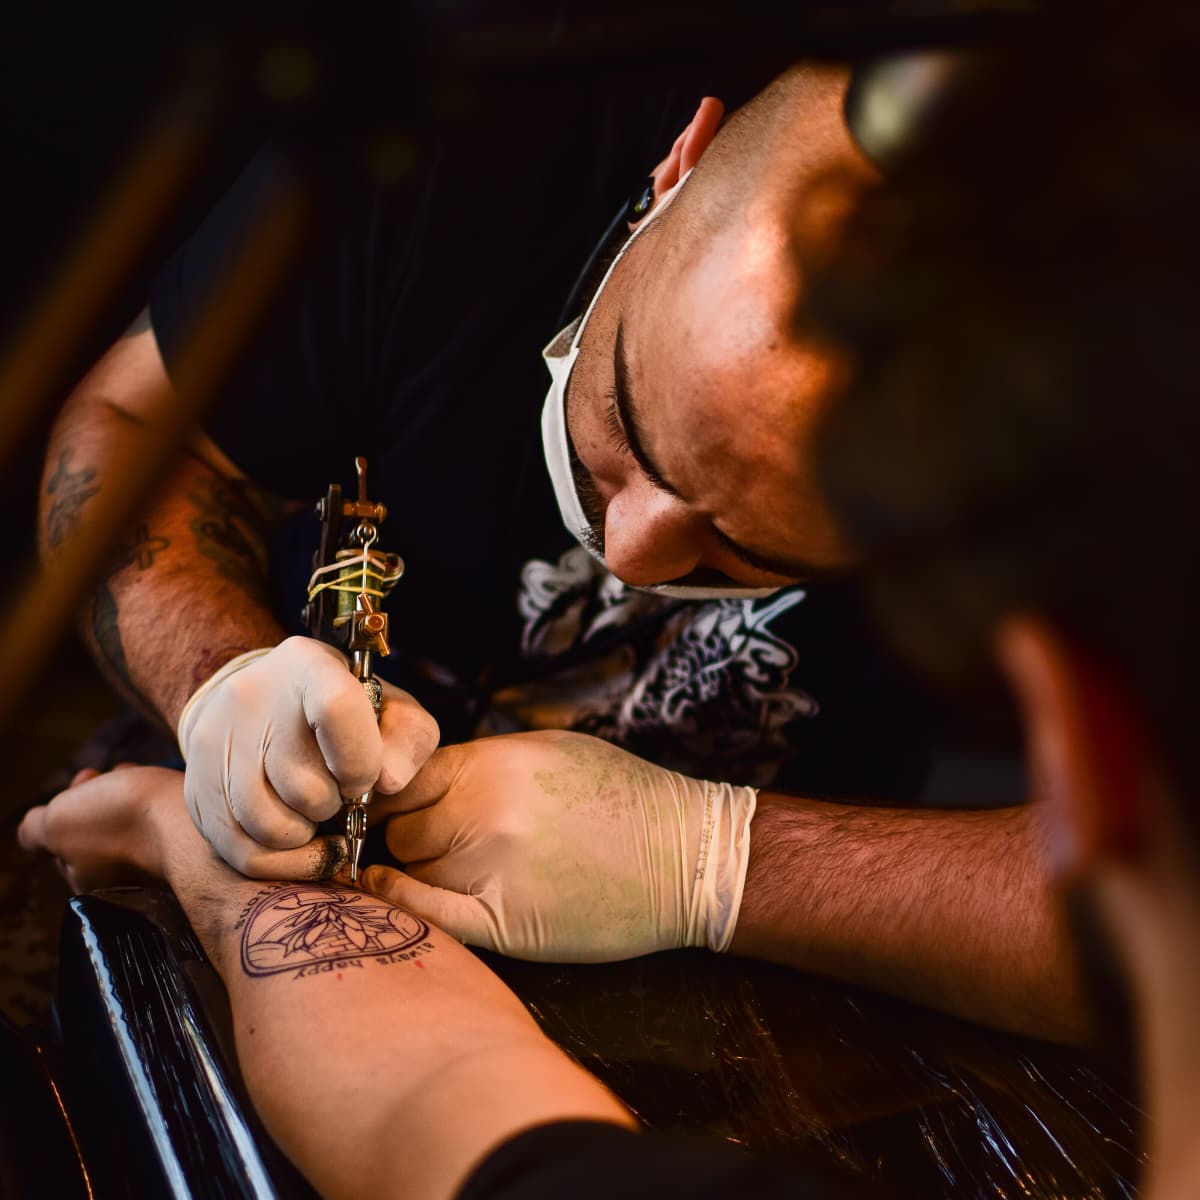 The Most Painful Places to Get a Tattoo - TatRing